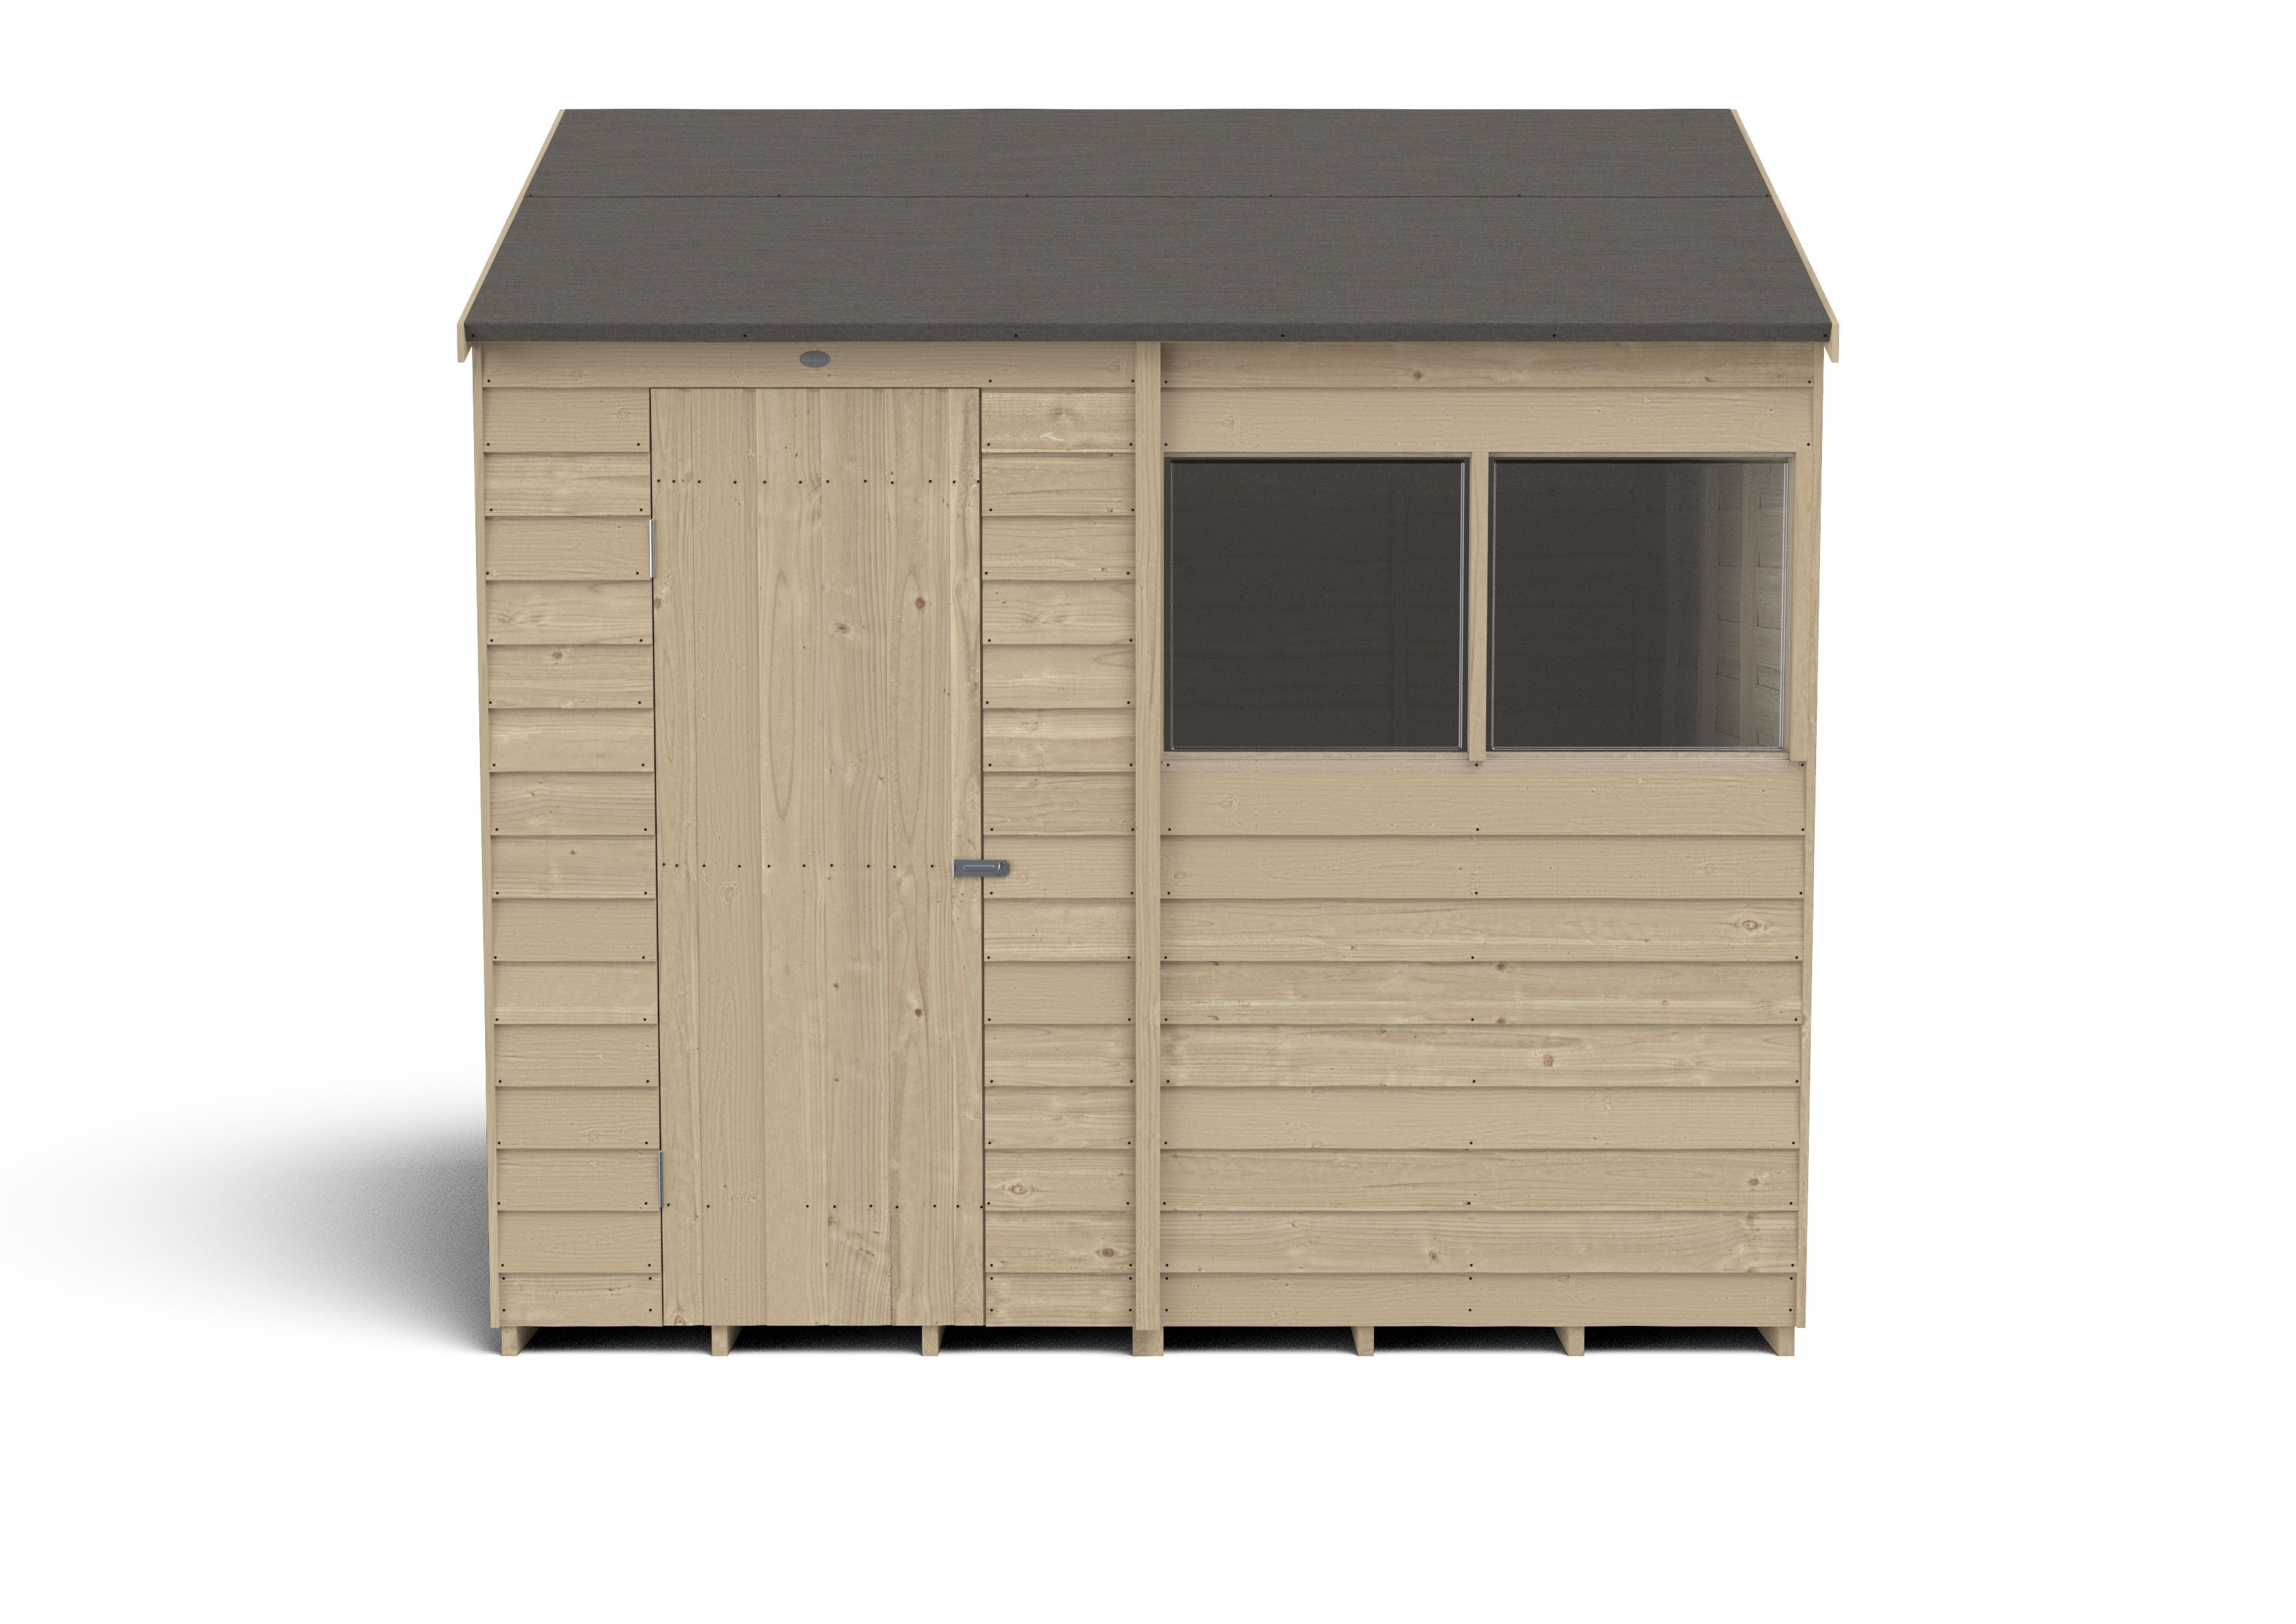 Forest Garden Overlap 8x6 ft Reverse apex Wooden Pressure treated Shed with floor & 2 windows (Base included)